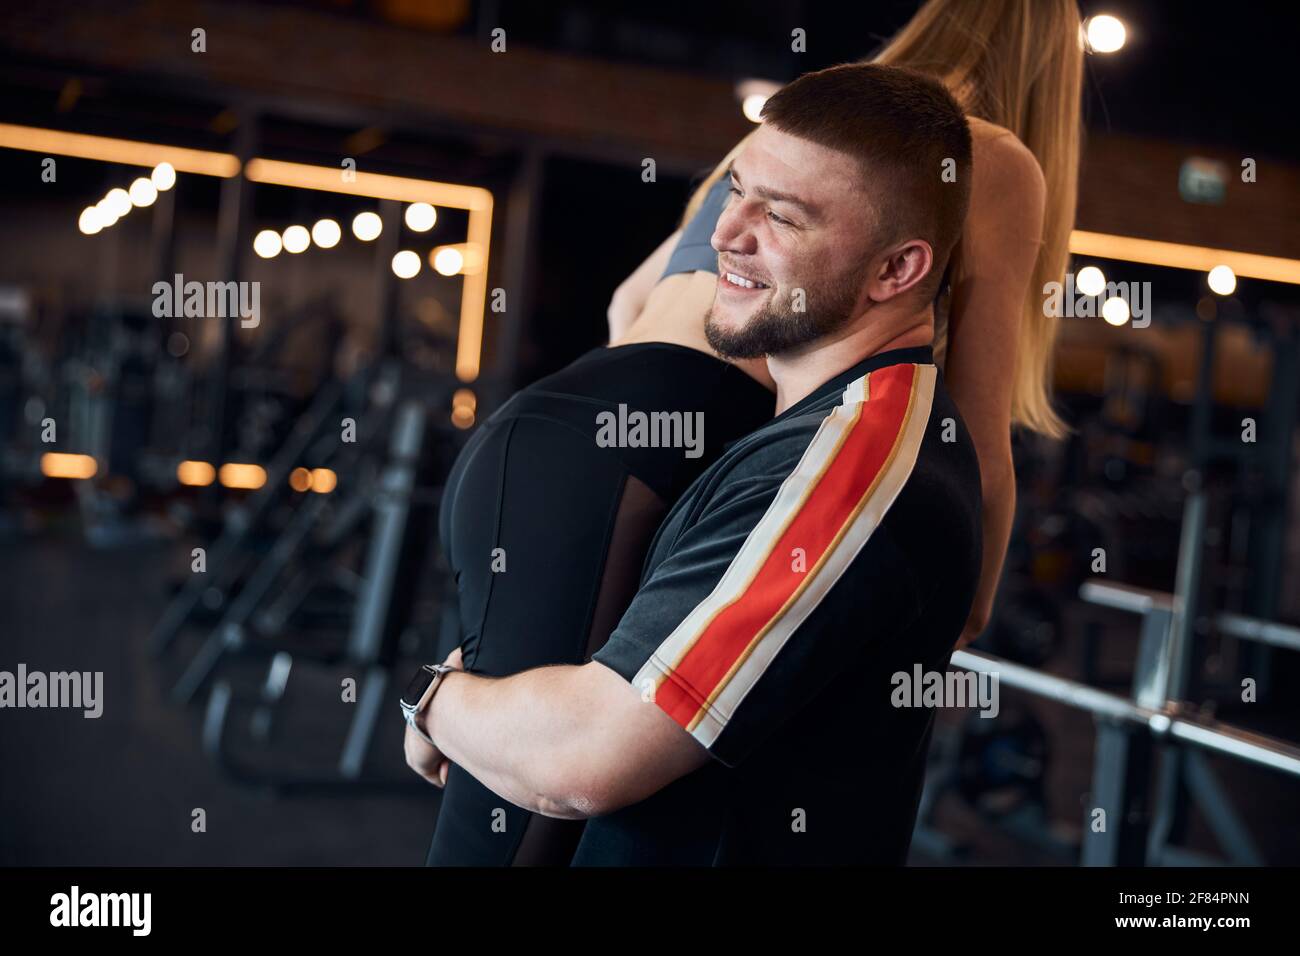 Smiley young man carrying a woman in sports attire Stock Photo